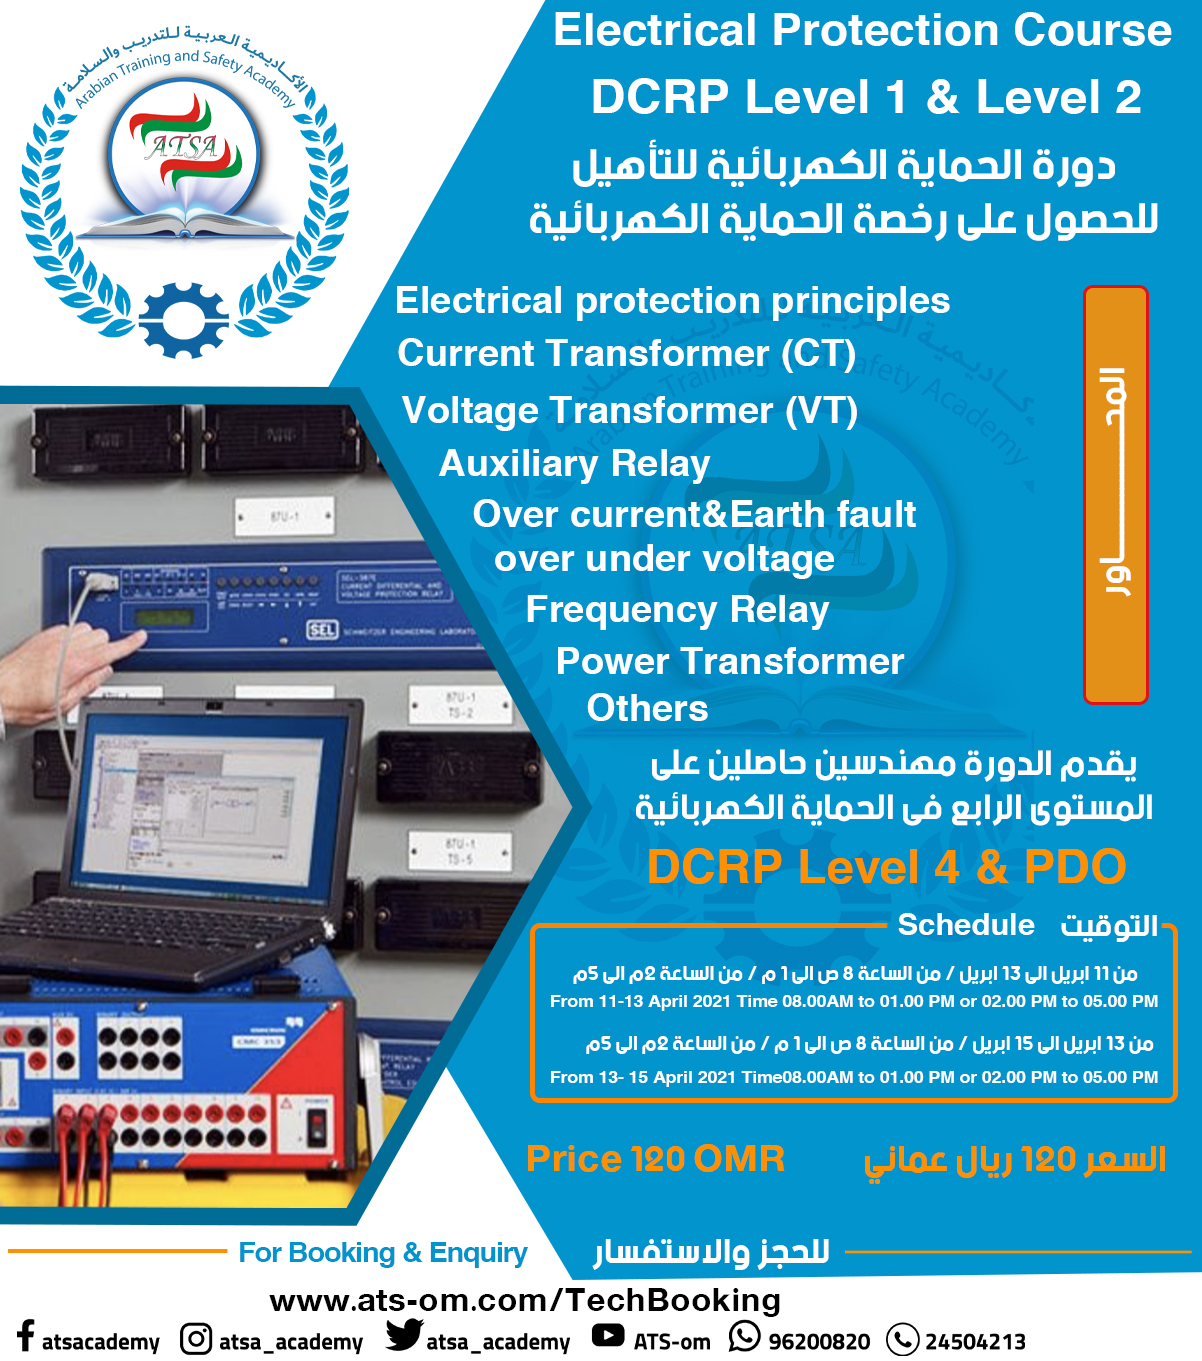 Electrical Protection Course